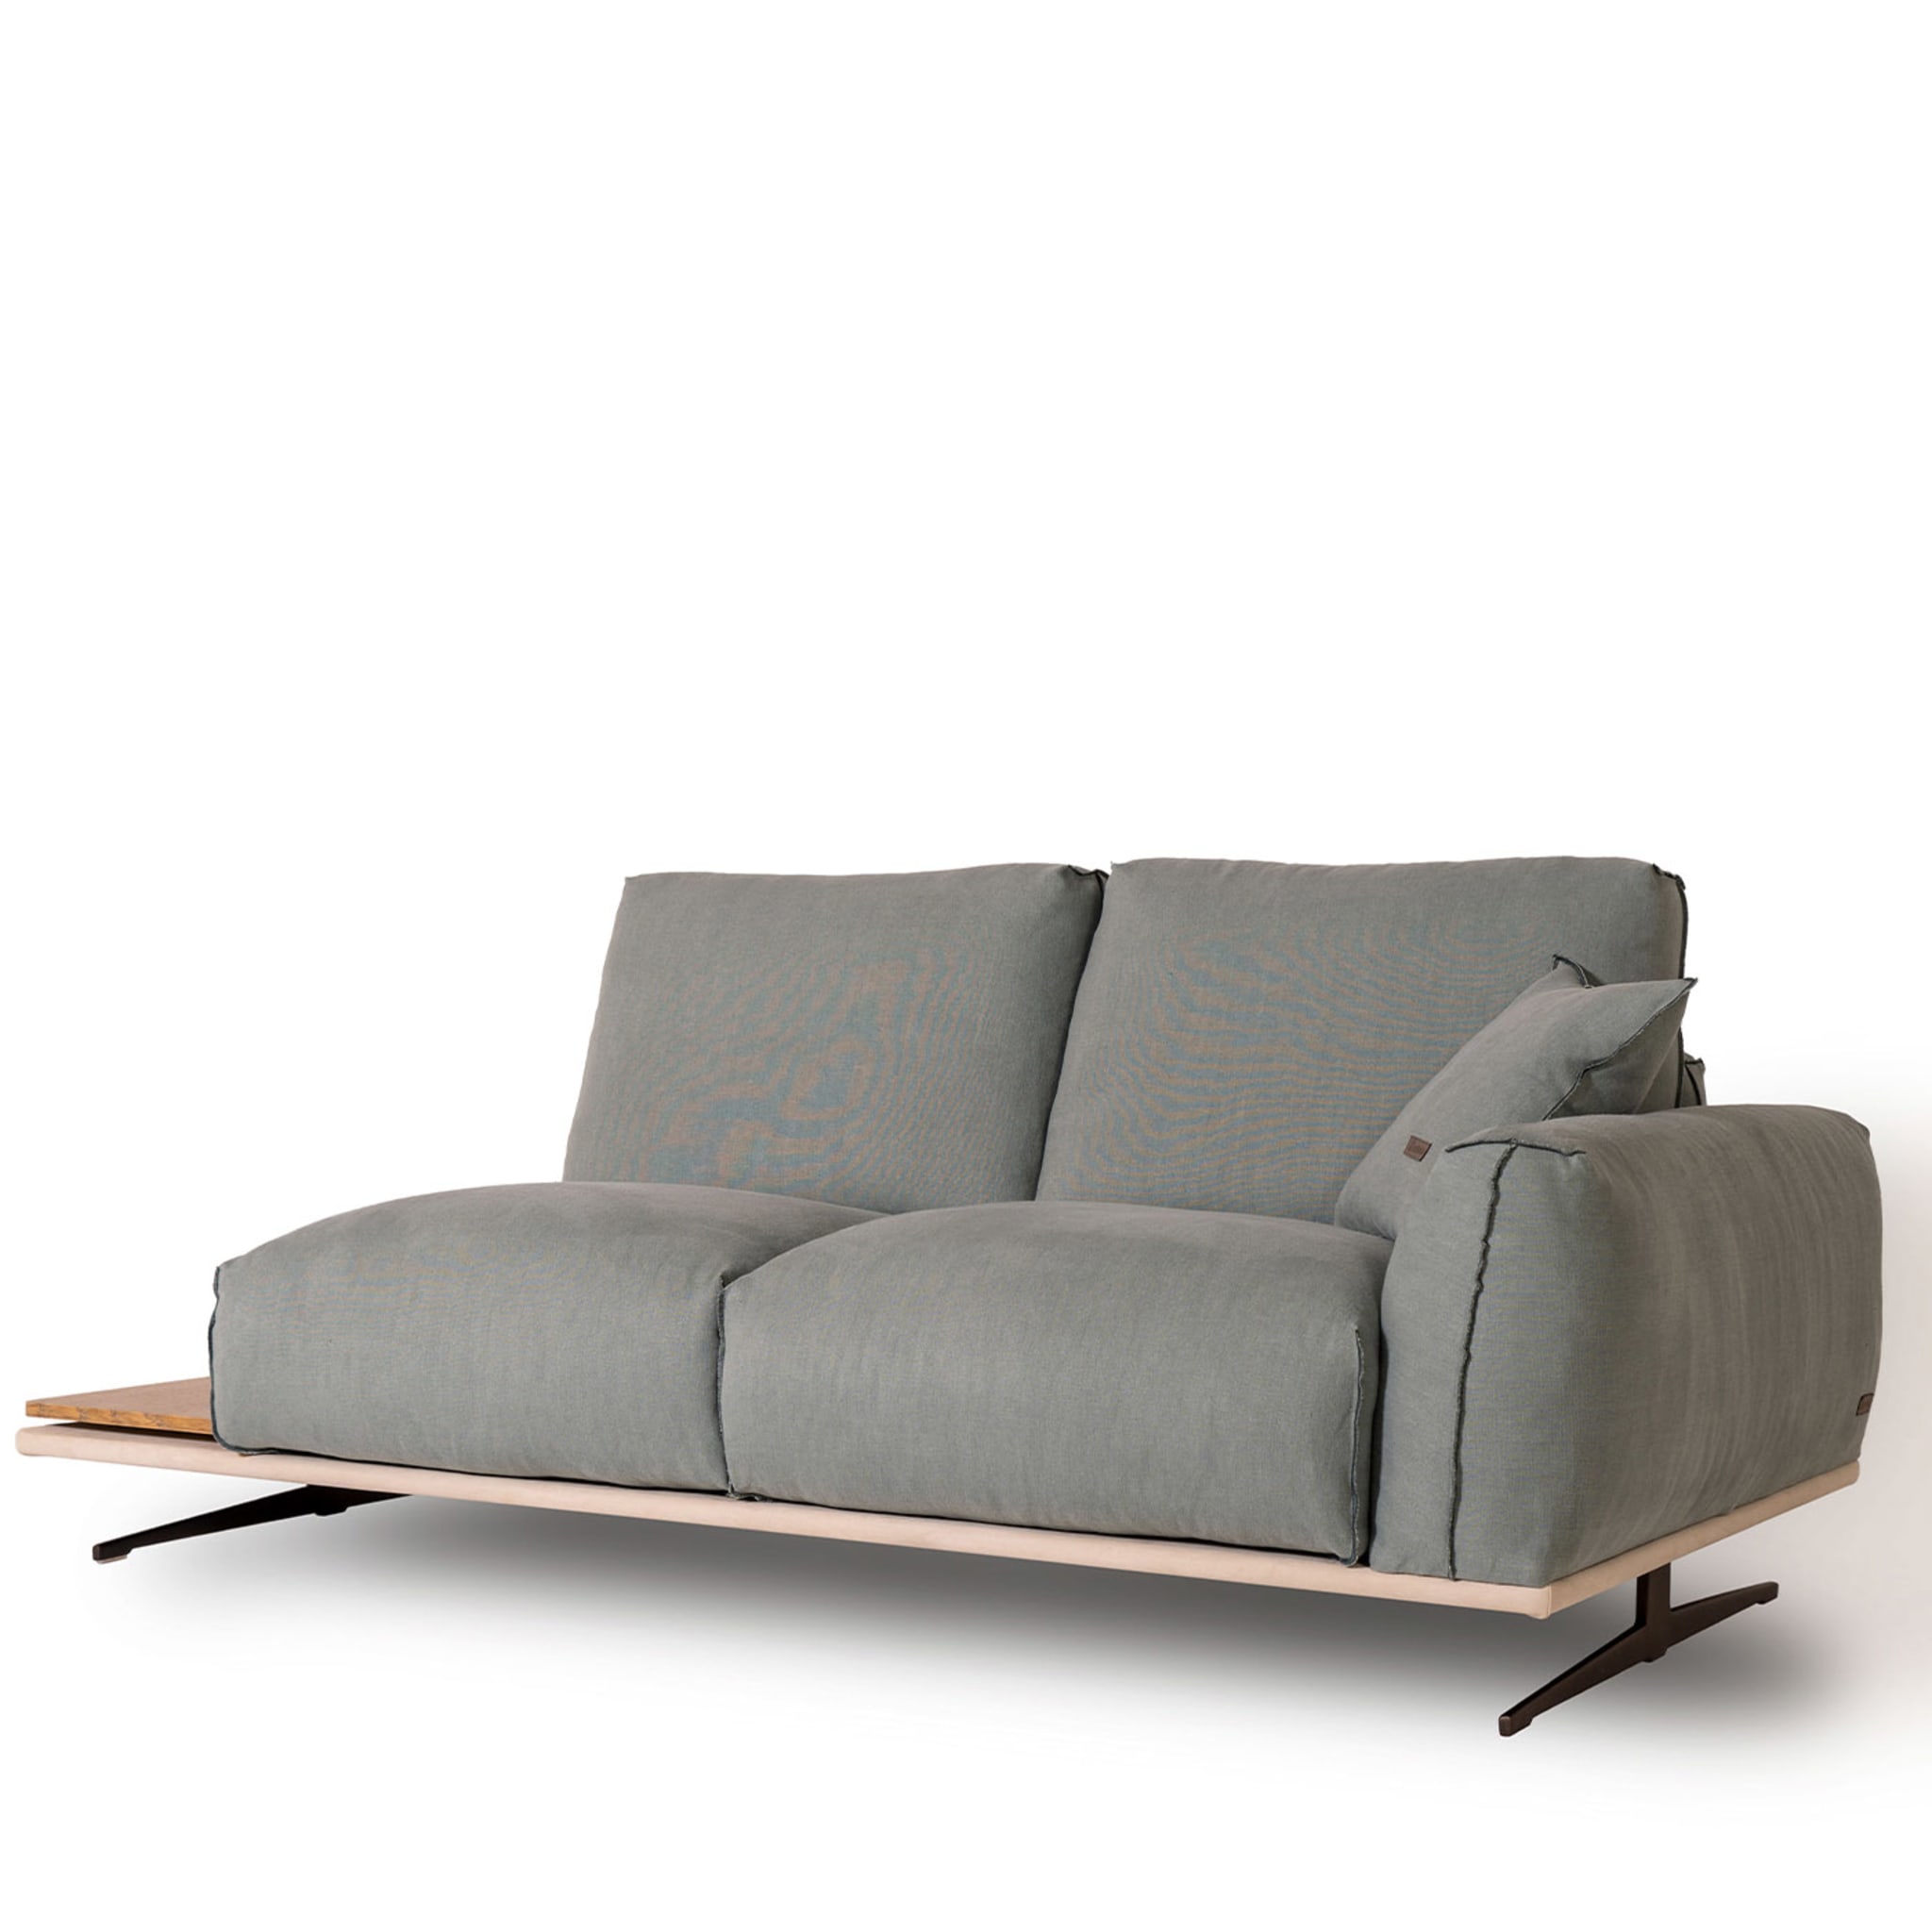 Boboli Sofa with Side Table by Marco and Giulio Mantellassi - Alternative view 3